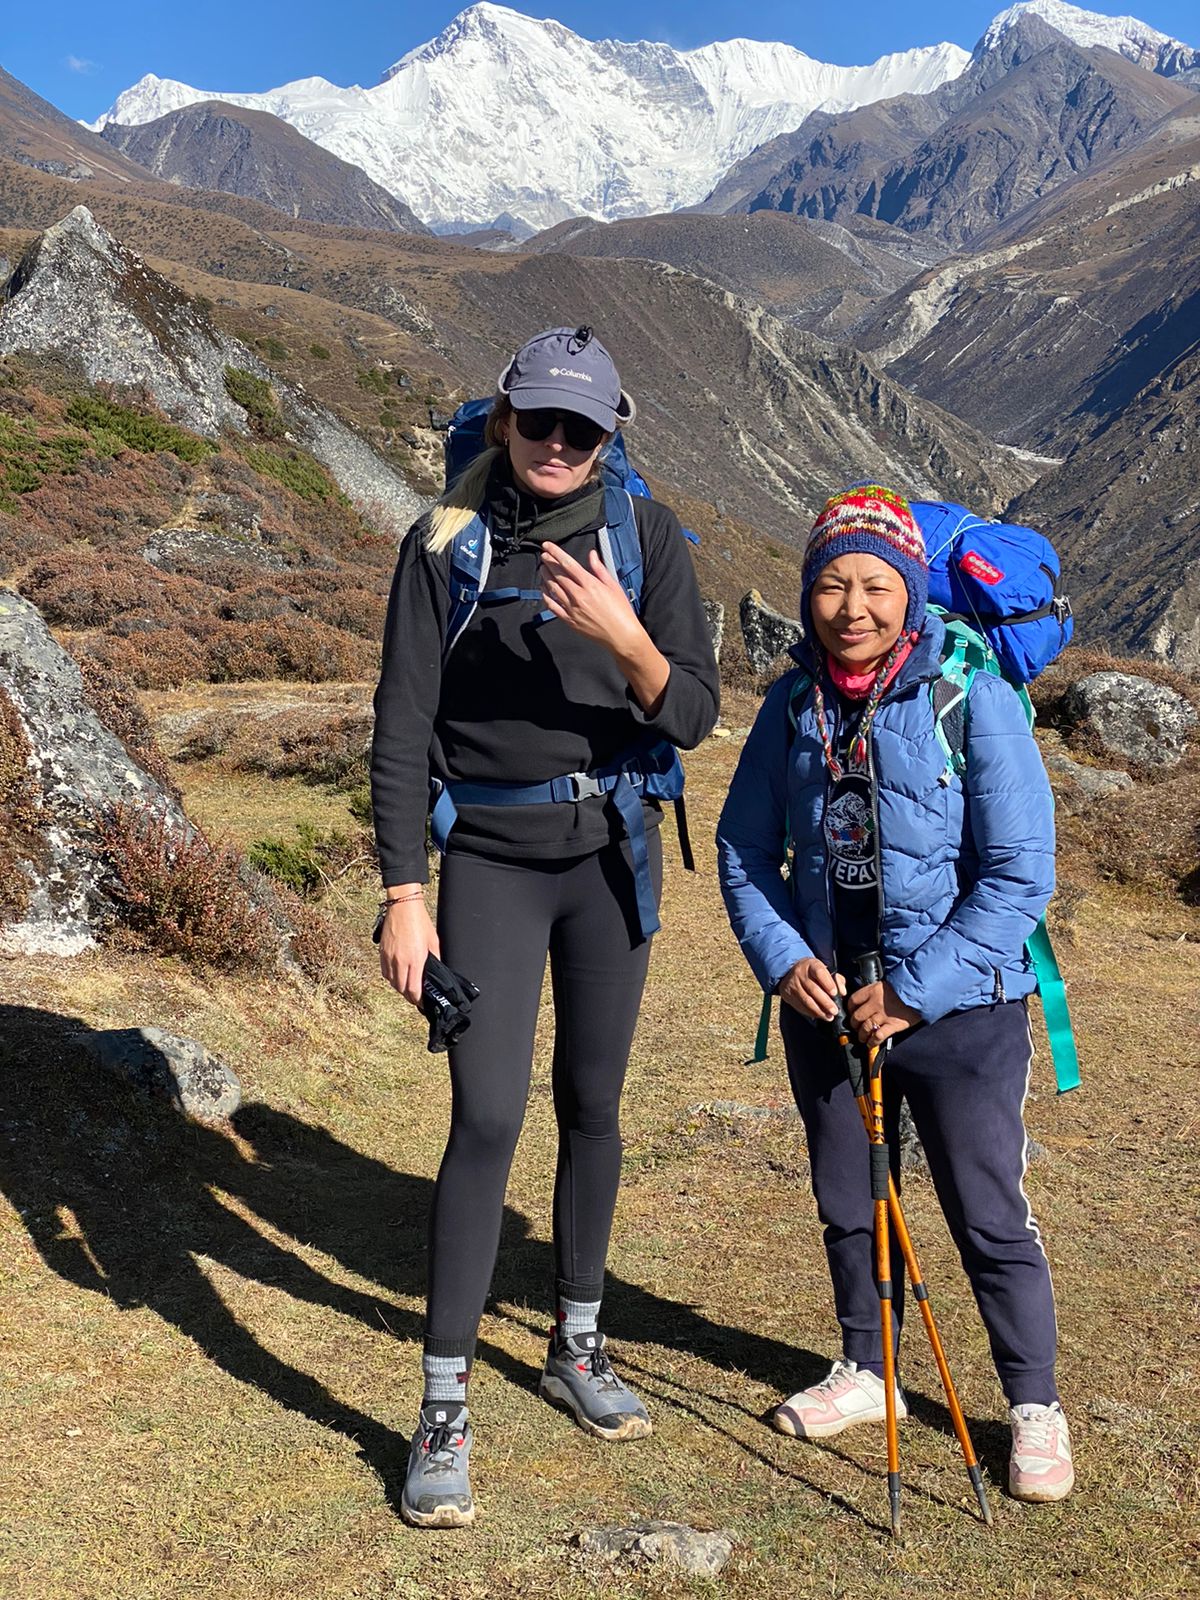 Trekkers must Hire a Trek Guide Effective from 1 April, 2023